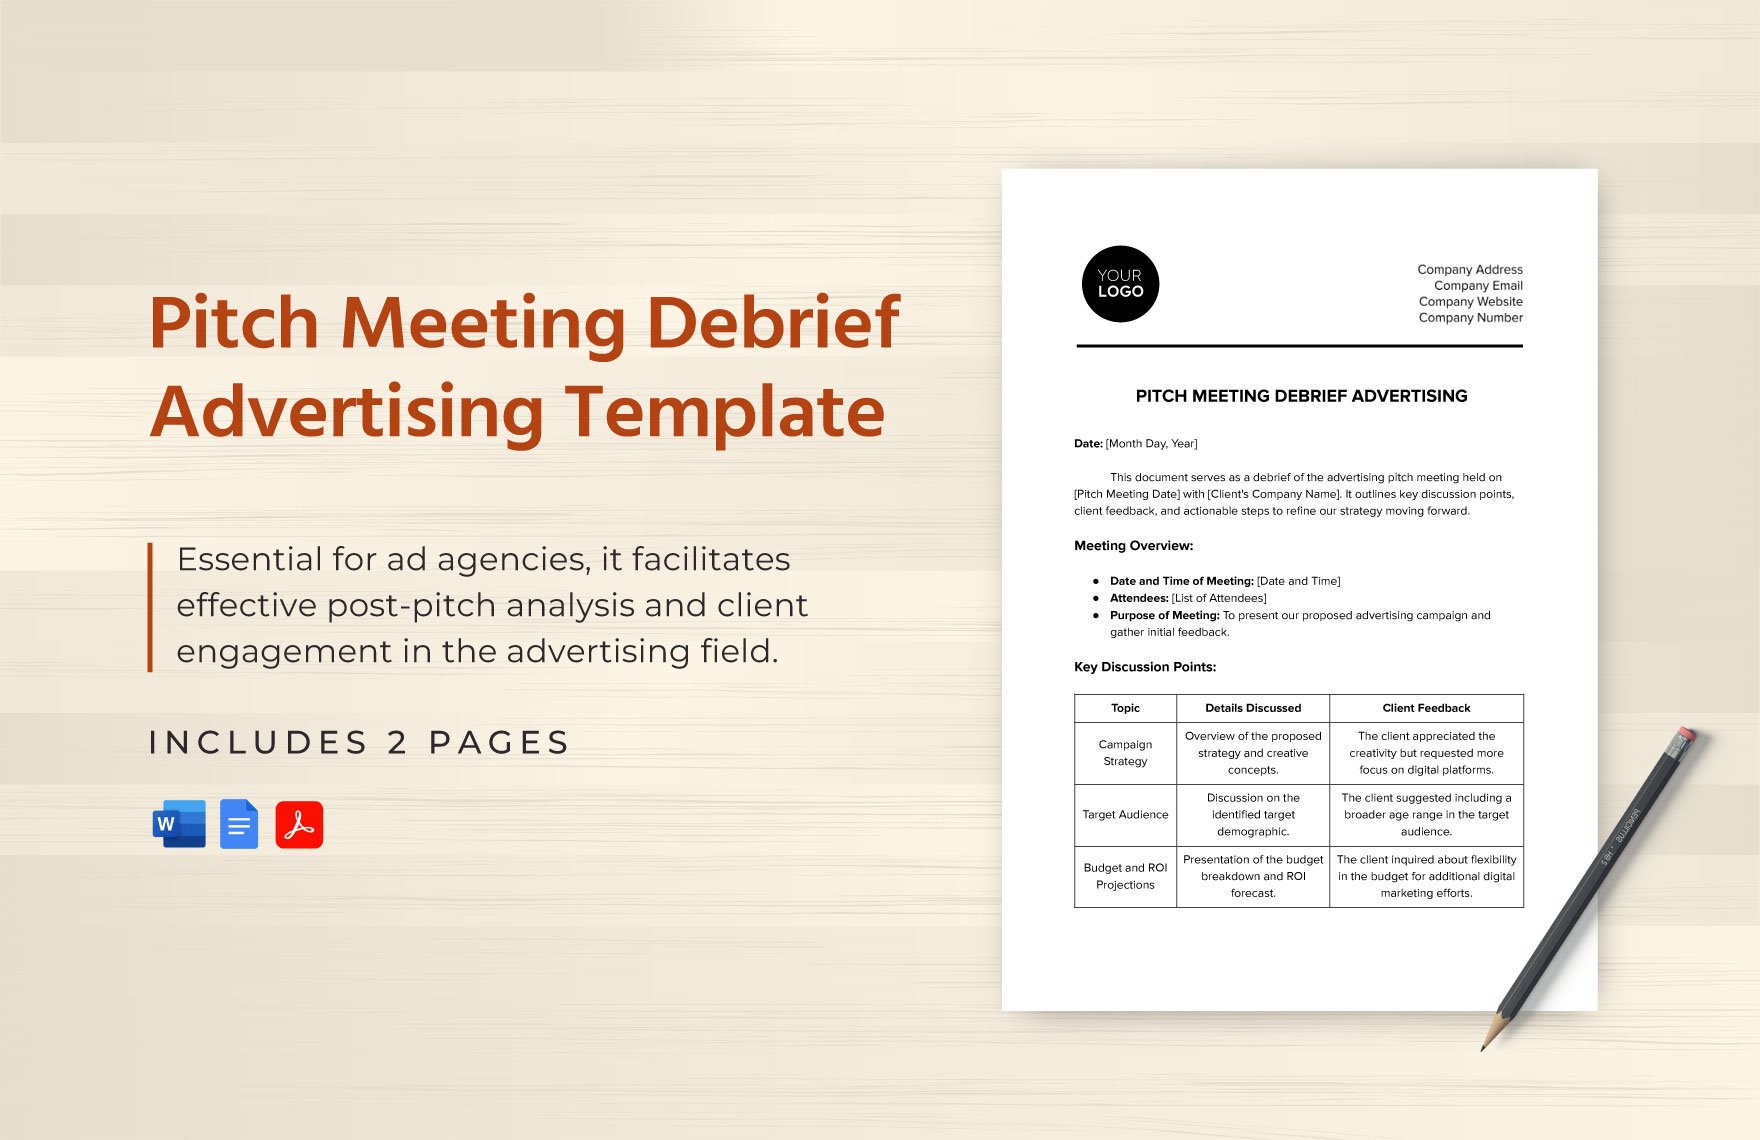 Pitch Meeting Debrief Advertising Template